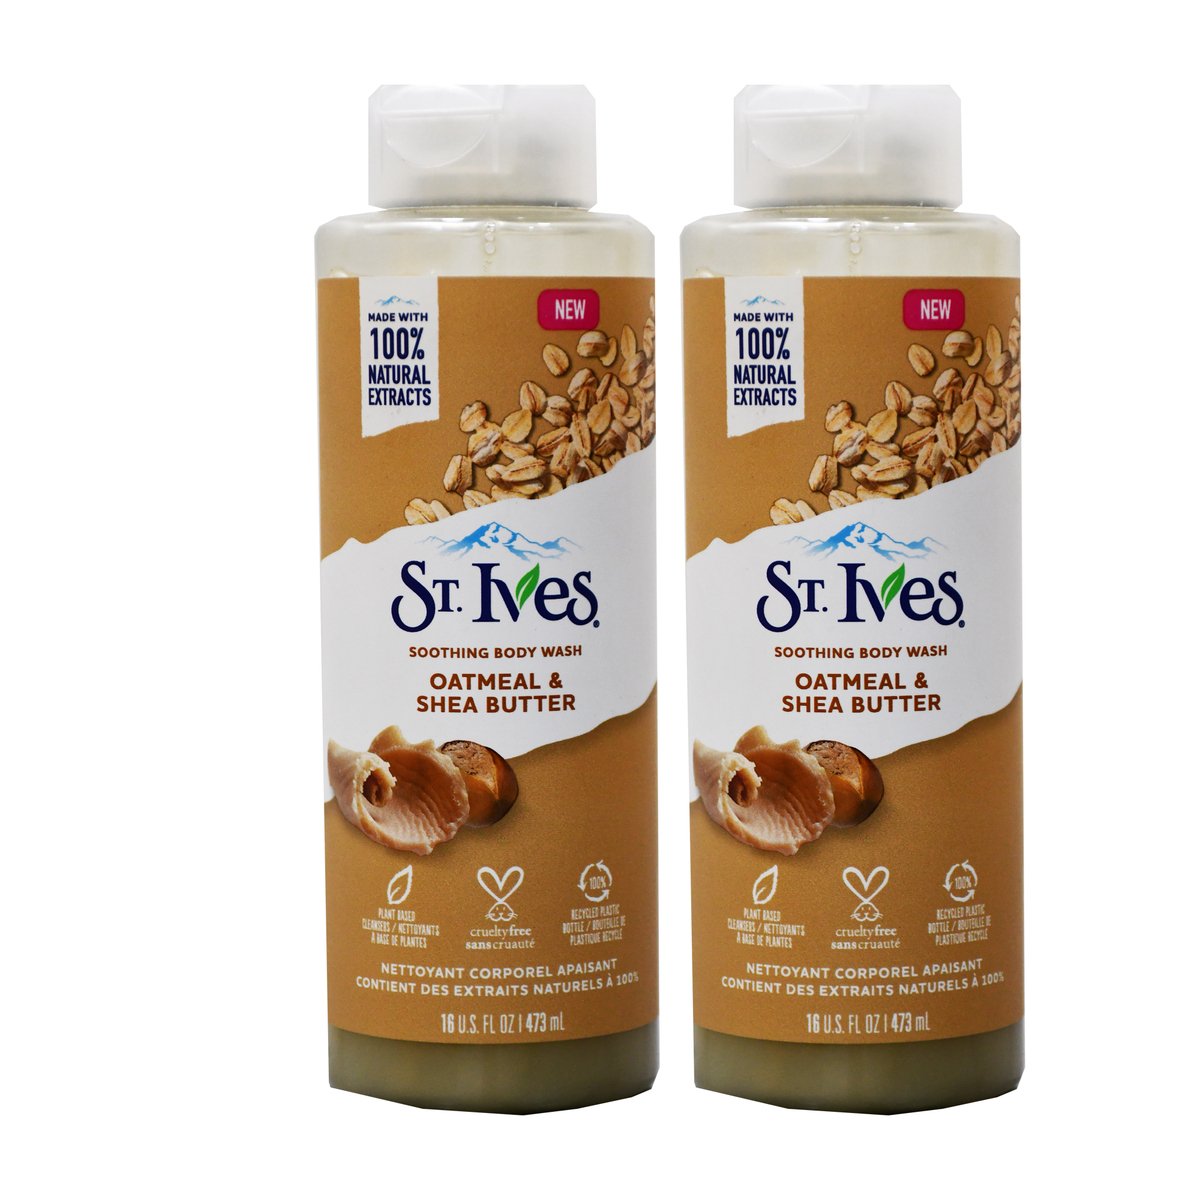 St. Ives Soothing Body Wash Oatmeal & Shea Butter 473ml 1+1